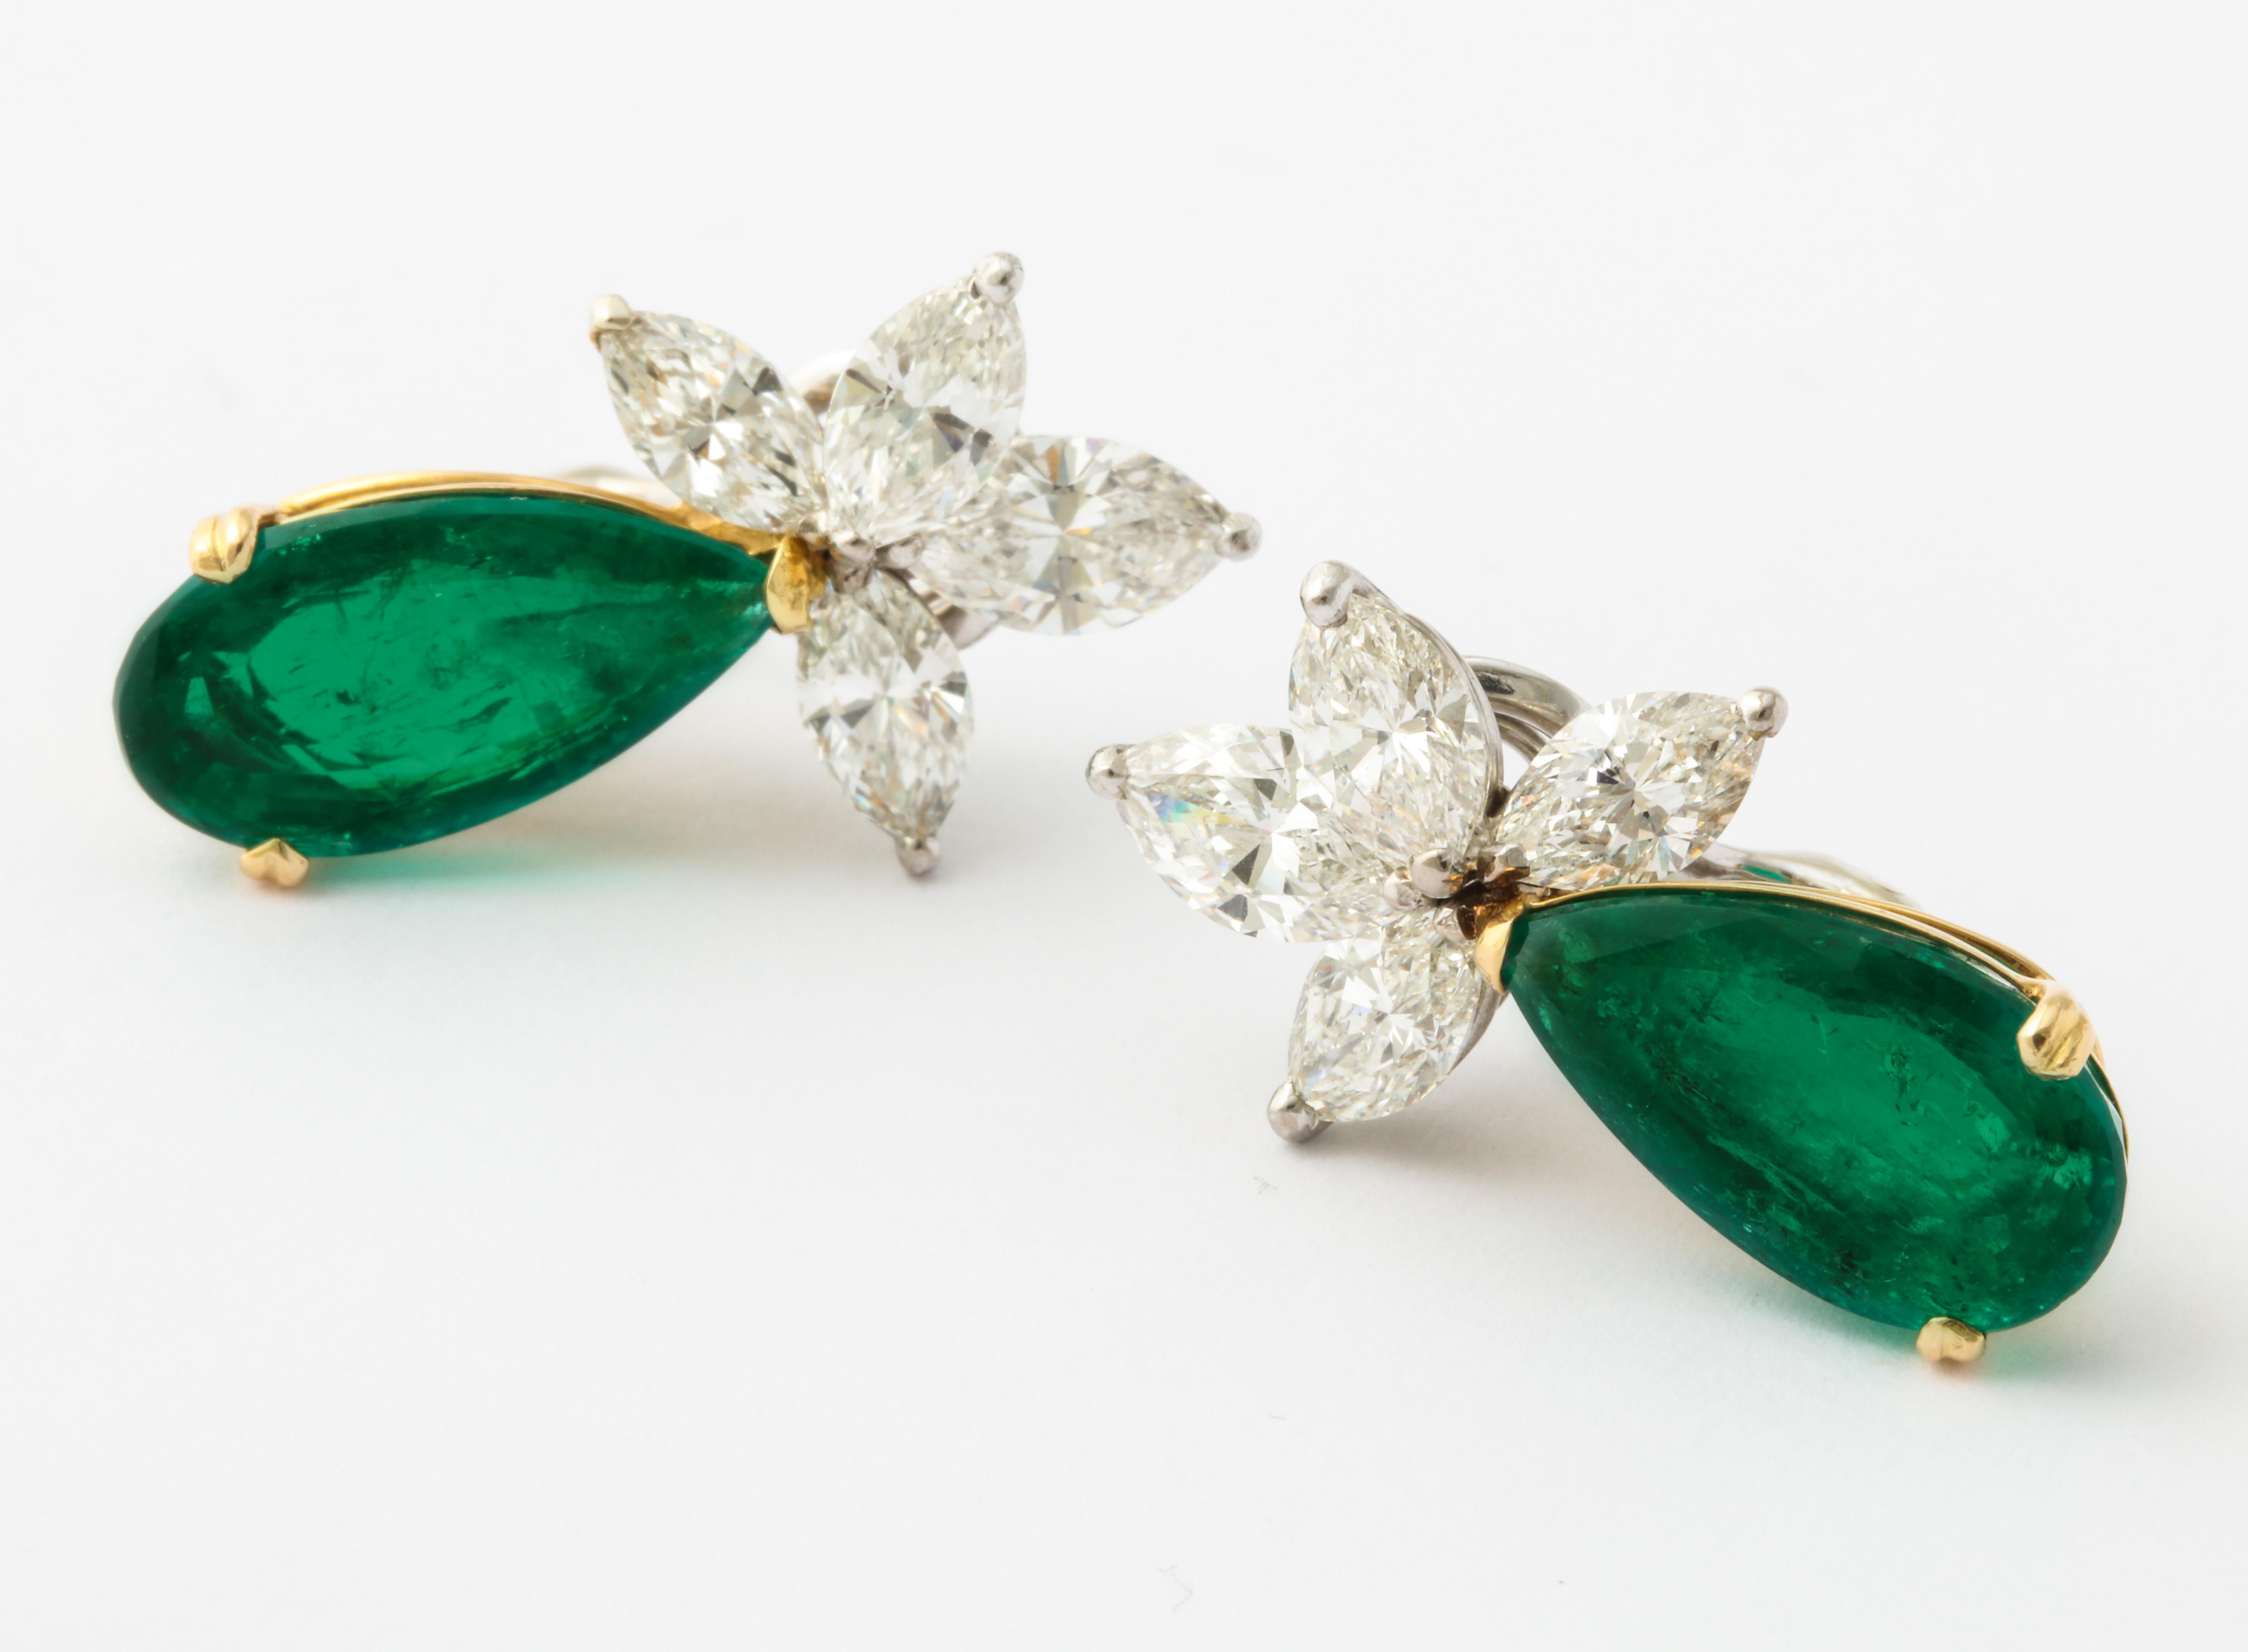 The beautifully matched pair of 5 carat Colombian emeralds hang delicately off of marquise diamond clusters in an elegant and timeless fashion.  

1 pear shape emerald 5.03cts (Gubelin certificate)
1 pear shape emerald 5.61cts (Gubelin